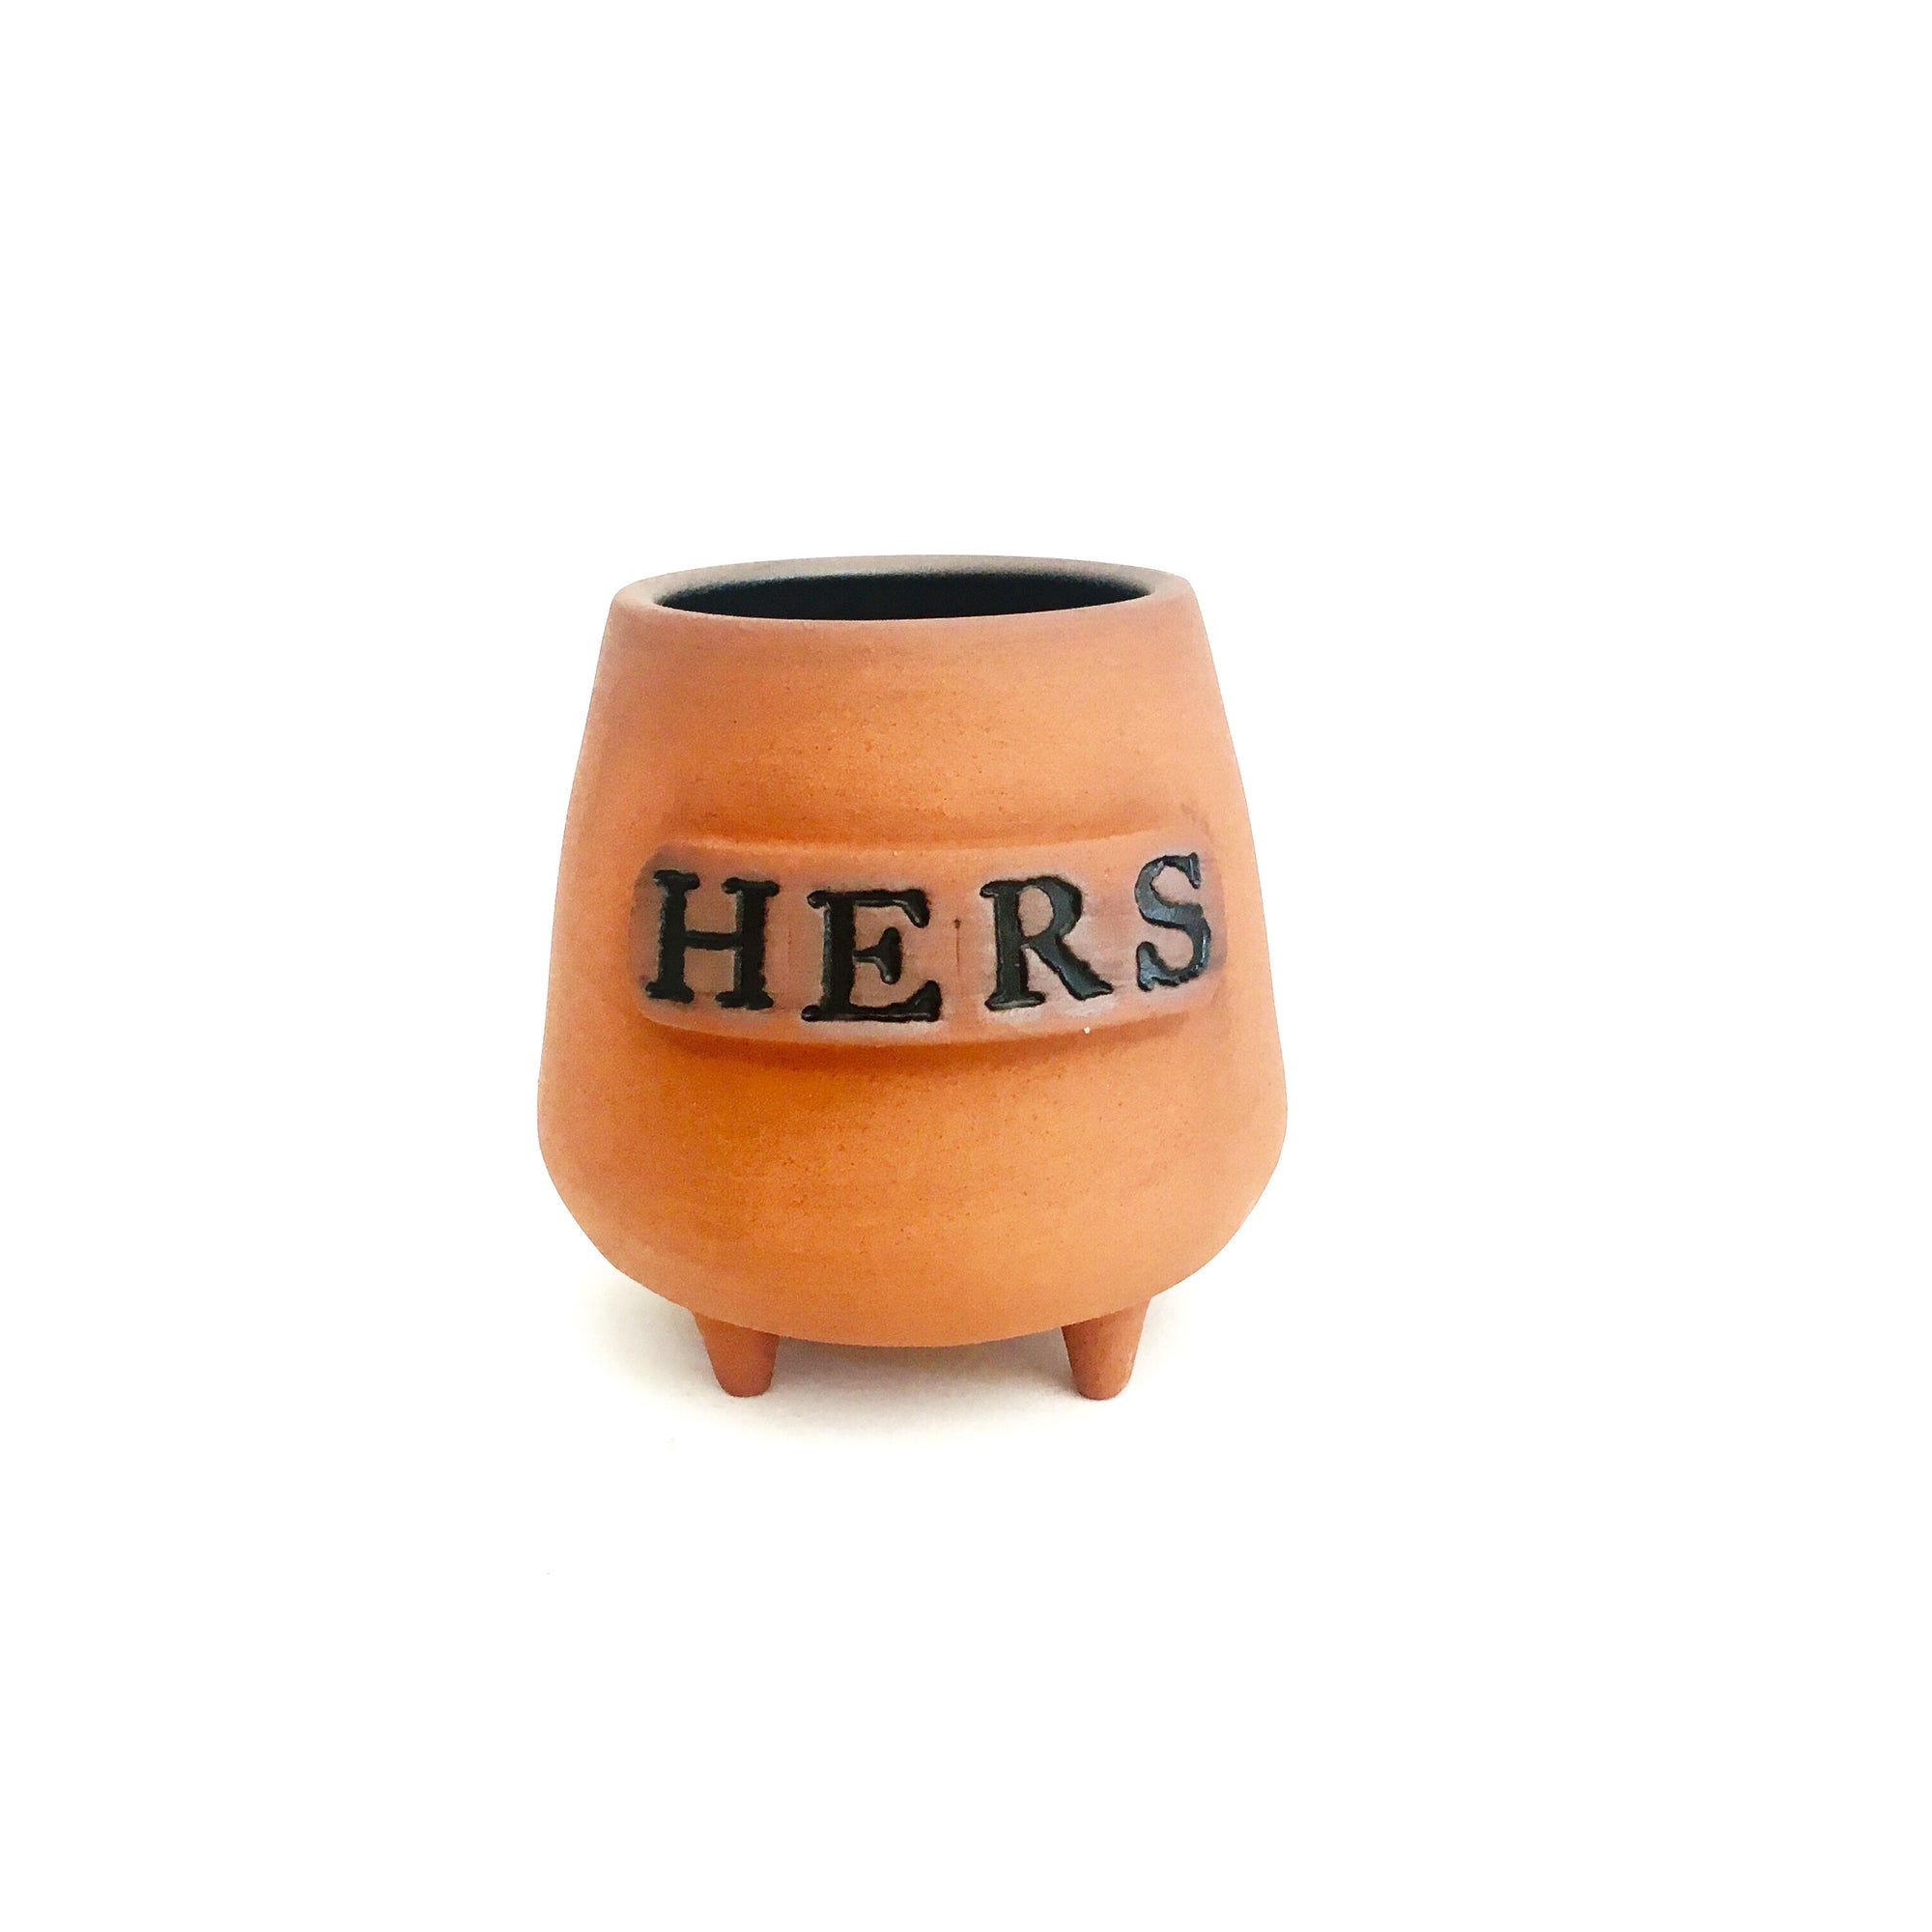 Ceramic Cup with "Hers" Inscribed